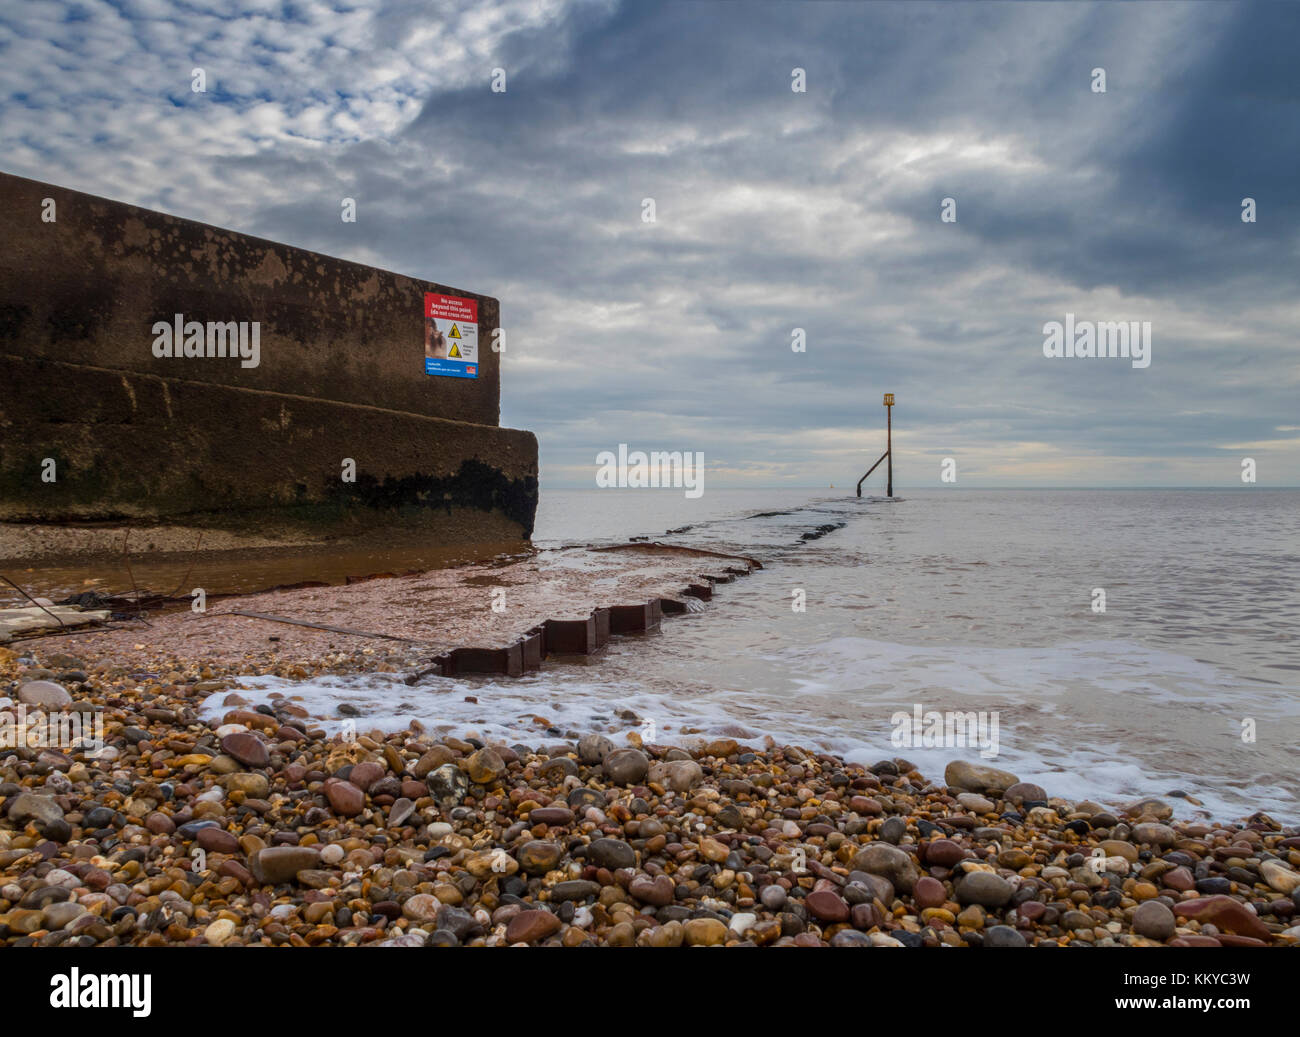 Concrete sea defence at Port Royal,Sidmouth, Devon. The Port Royal area is to be redeveloped. Stock Photo